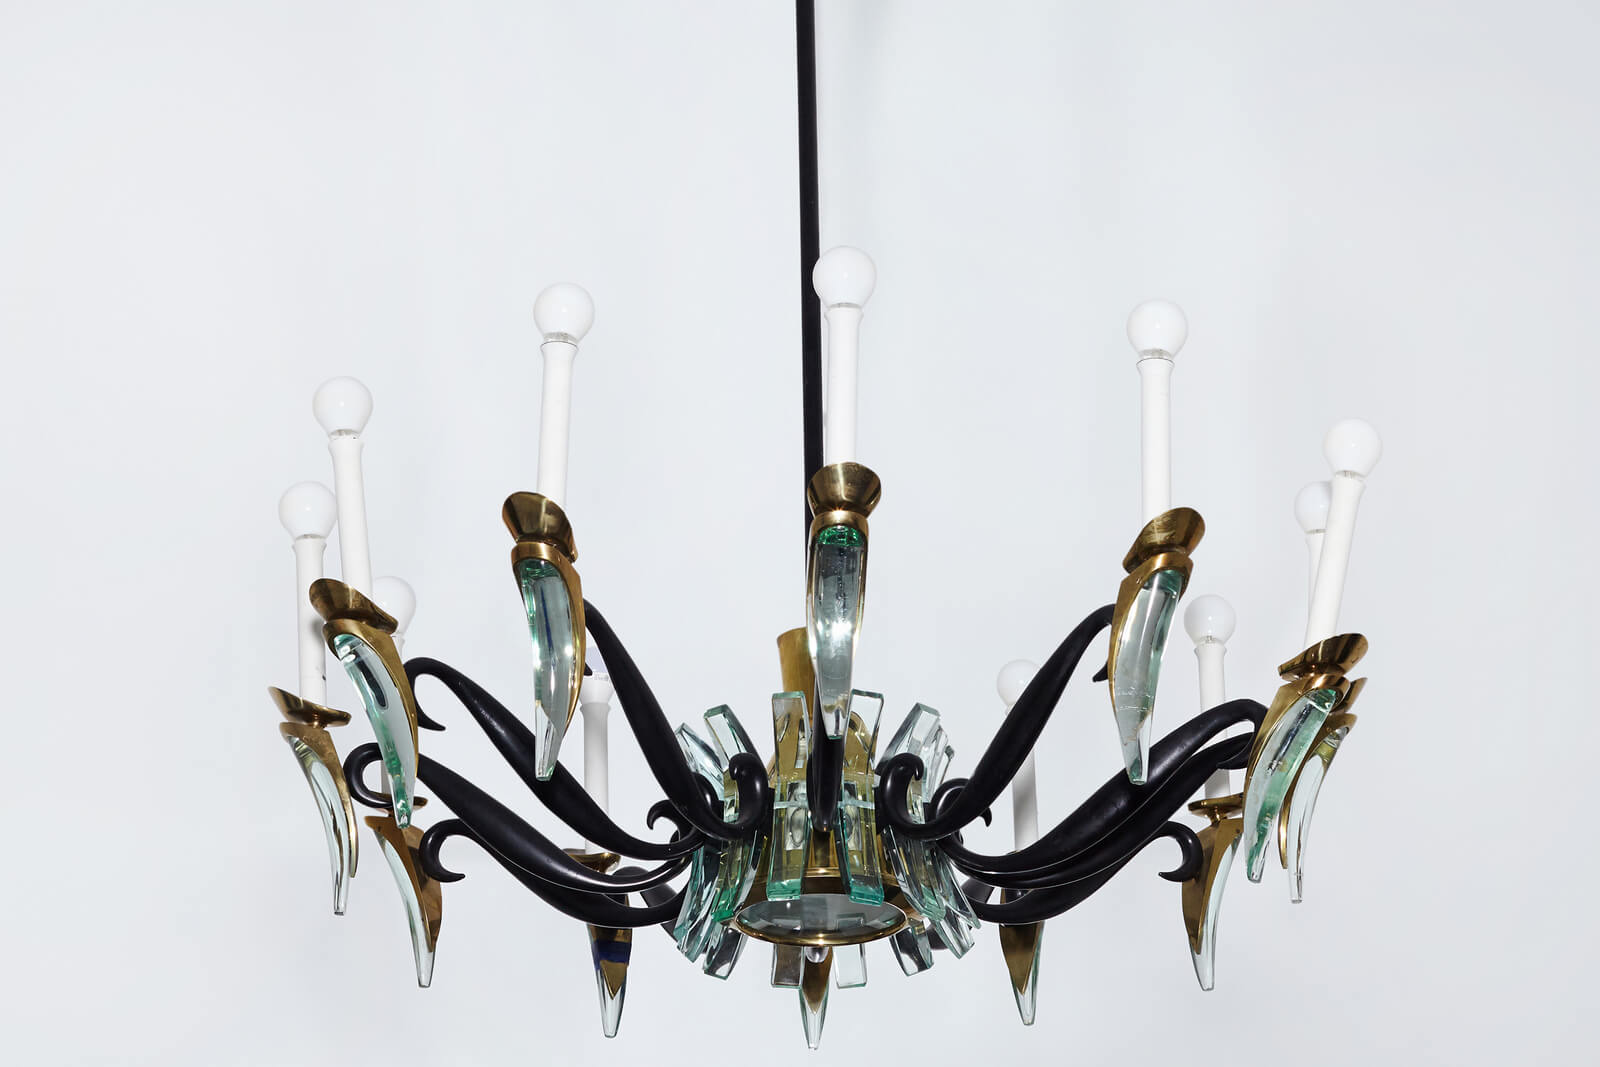 Ceiling lamp by Max Ingrand for sale